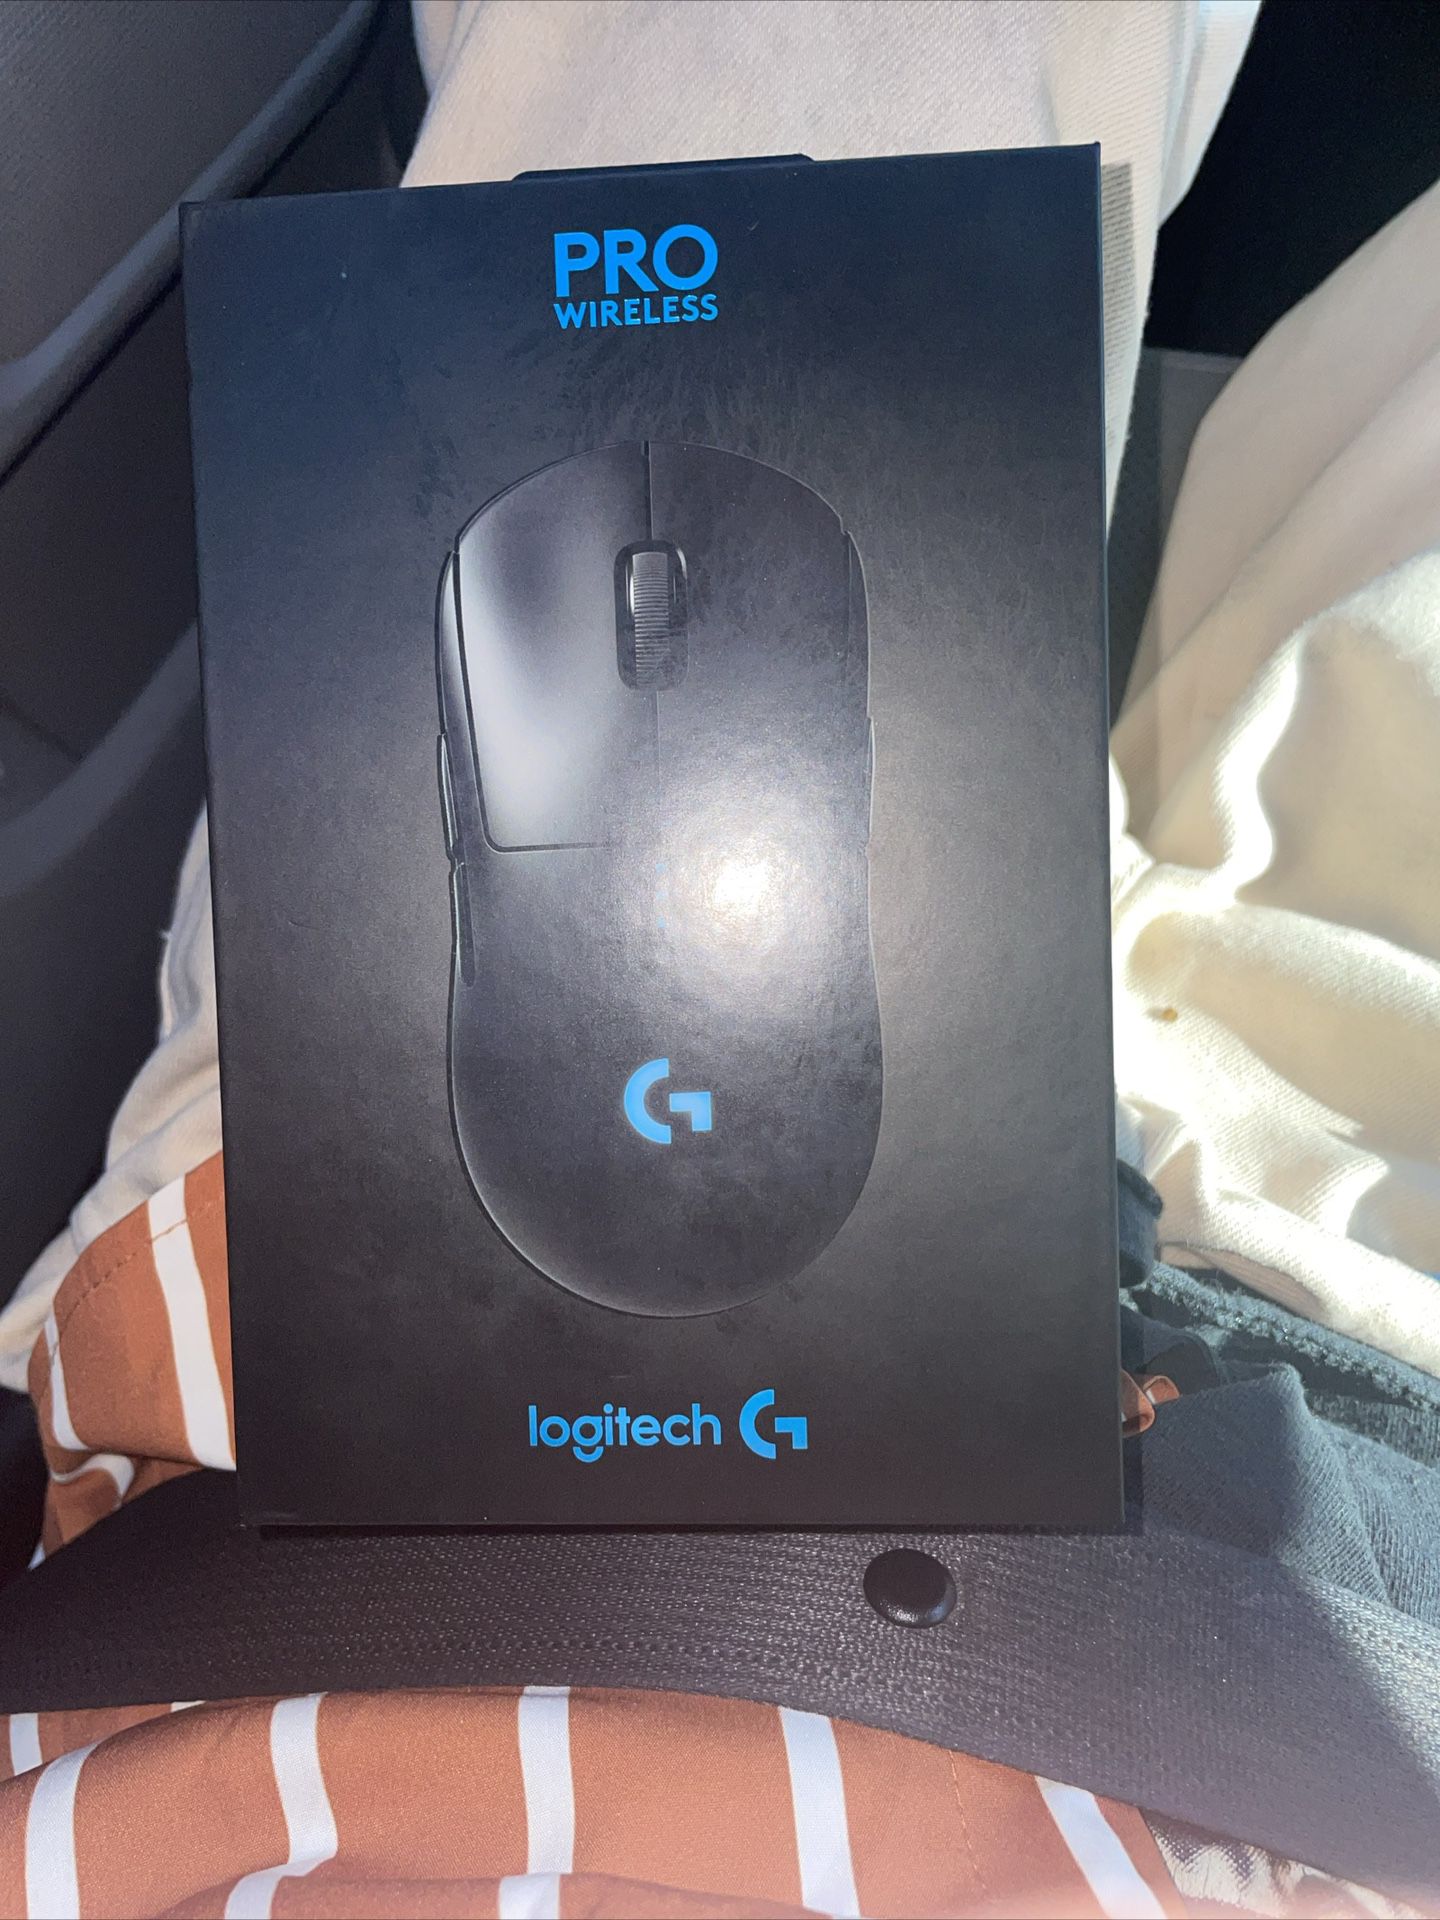 Logitech G Pro Wireless Gaming Mouse (Unopened)